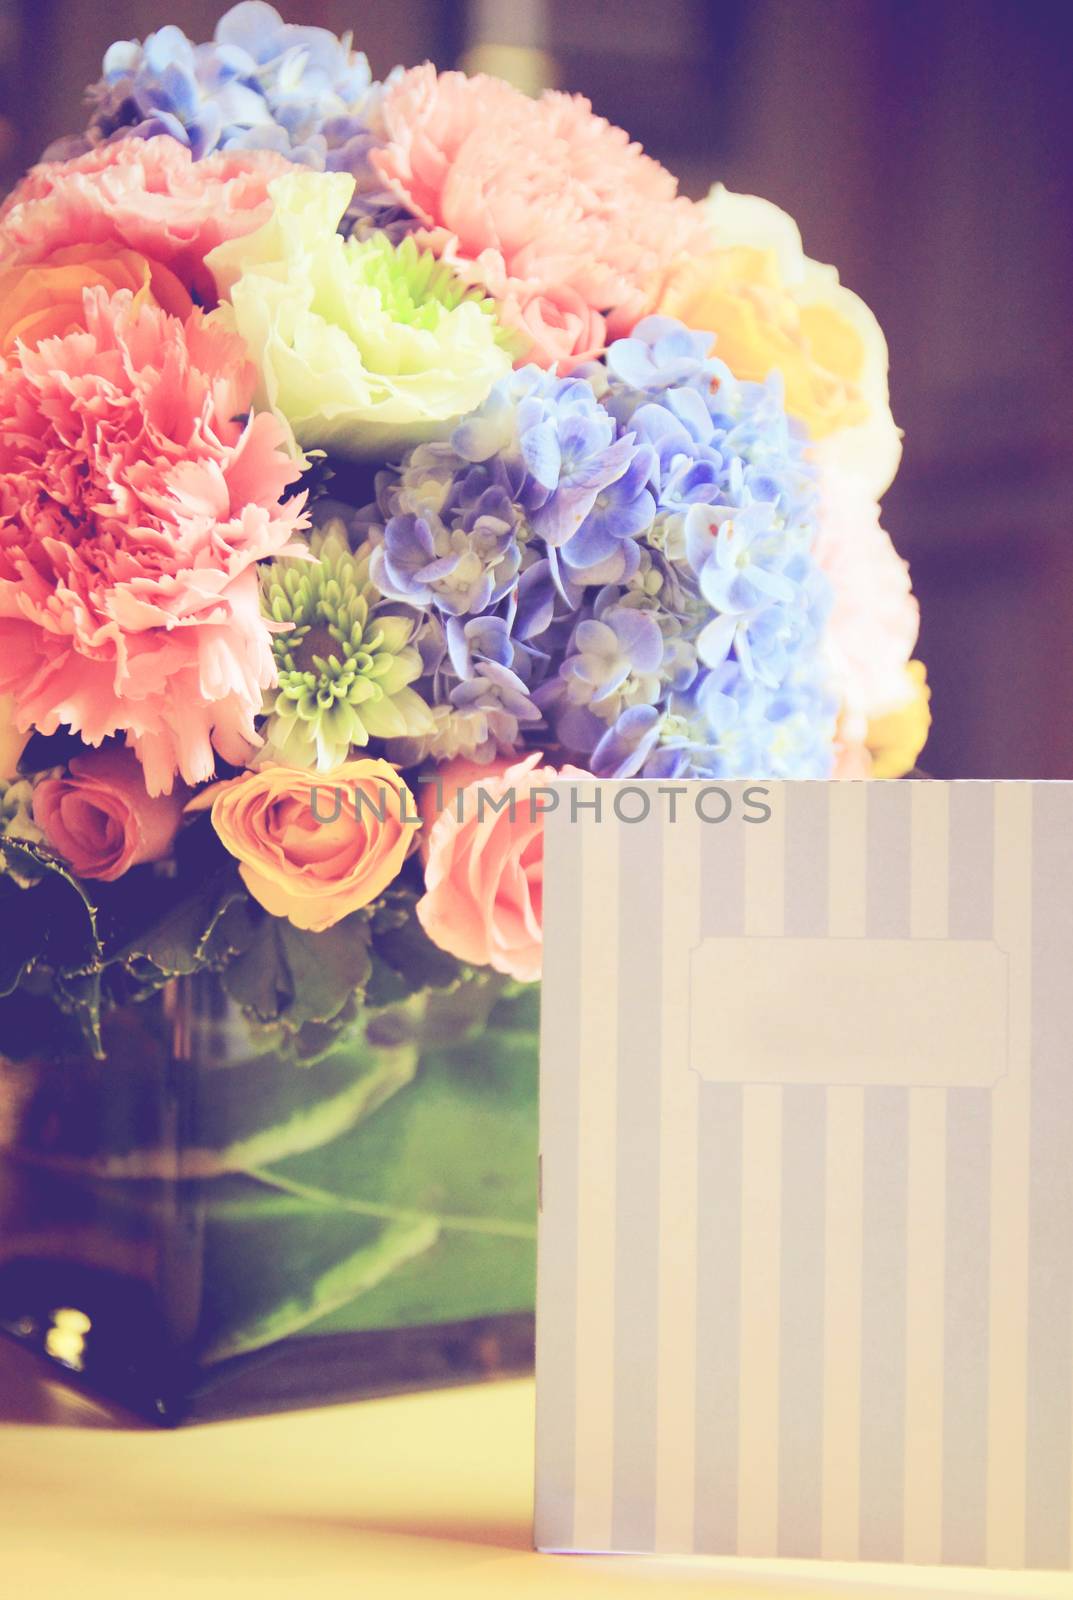 Invitation wedding card and flower with retro filter effect